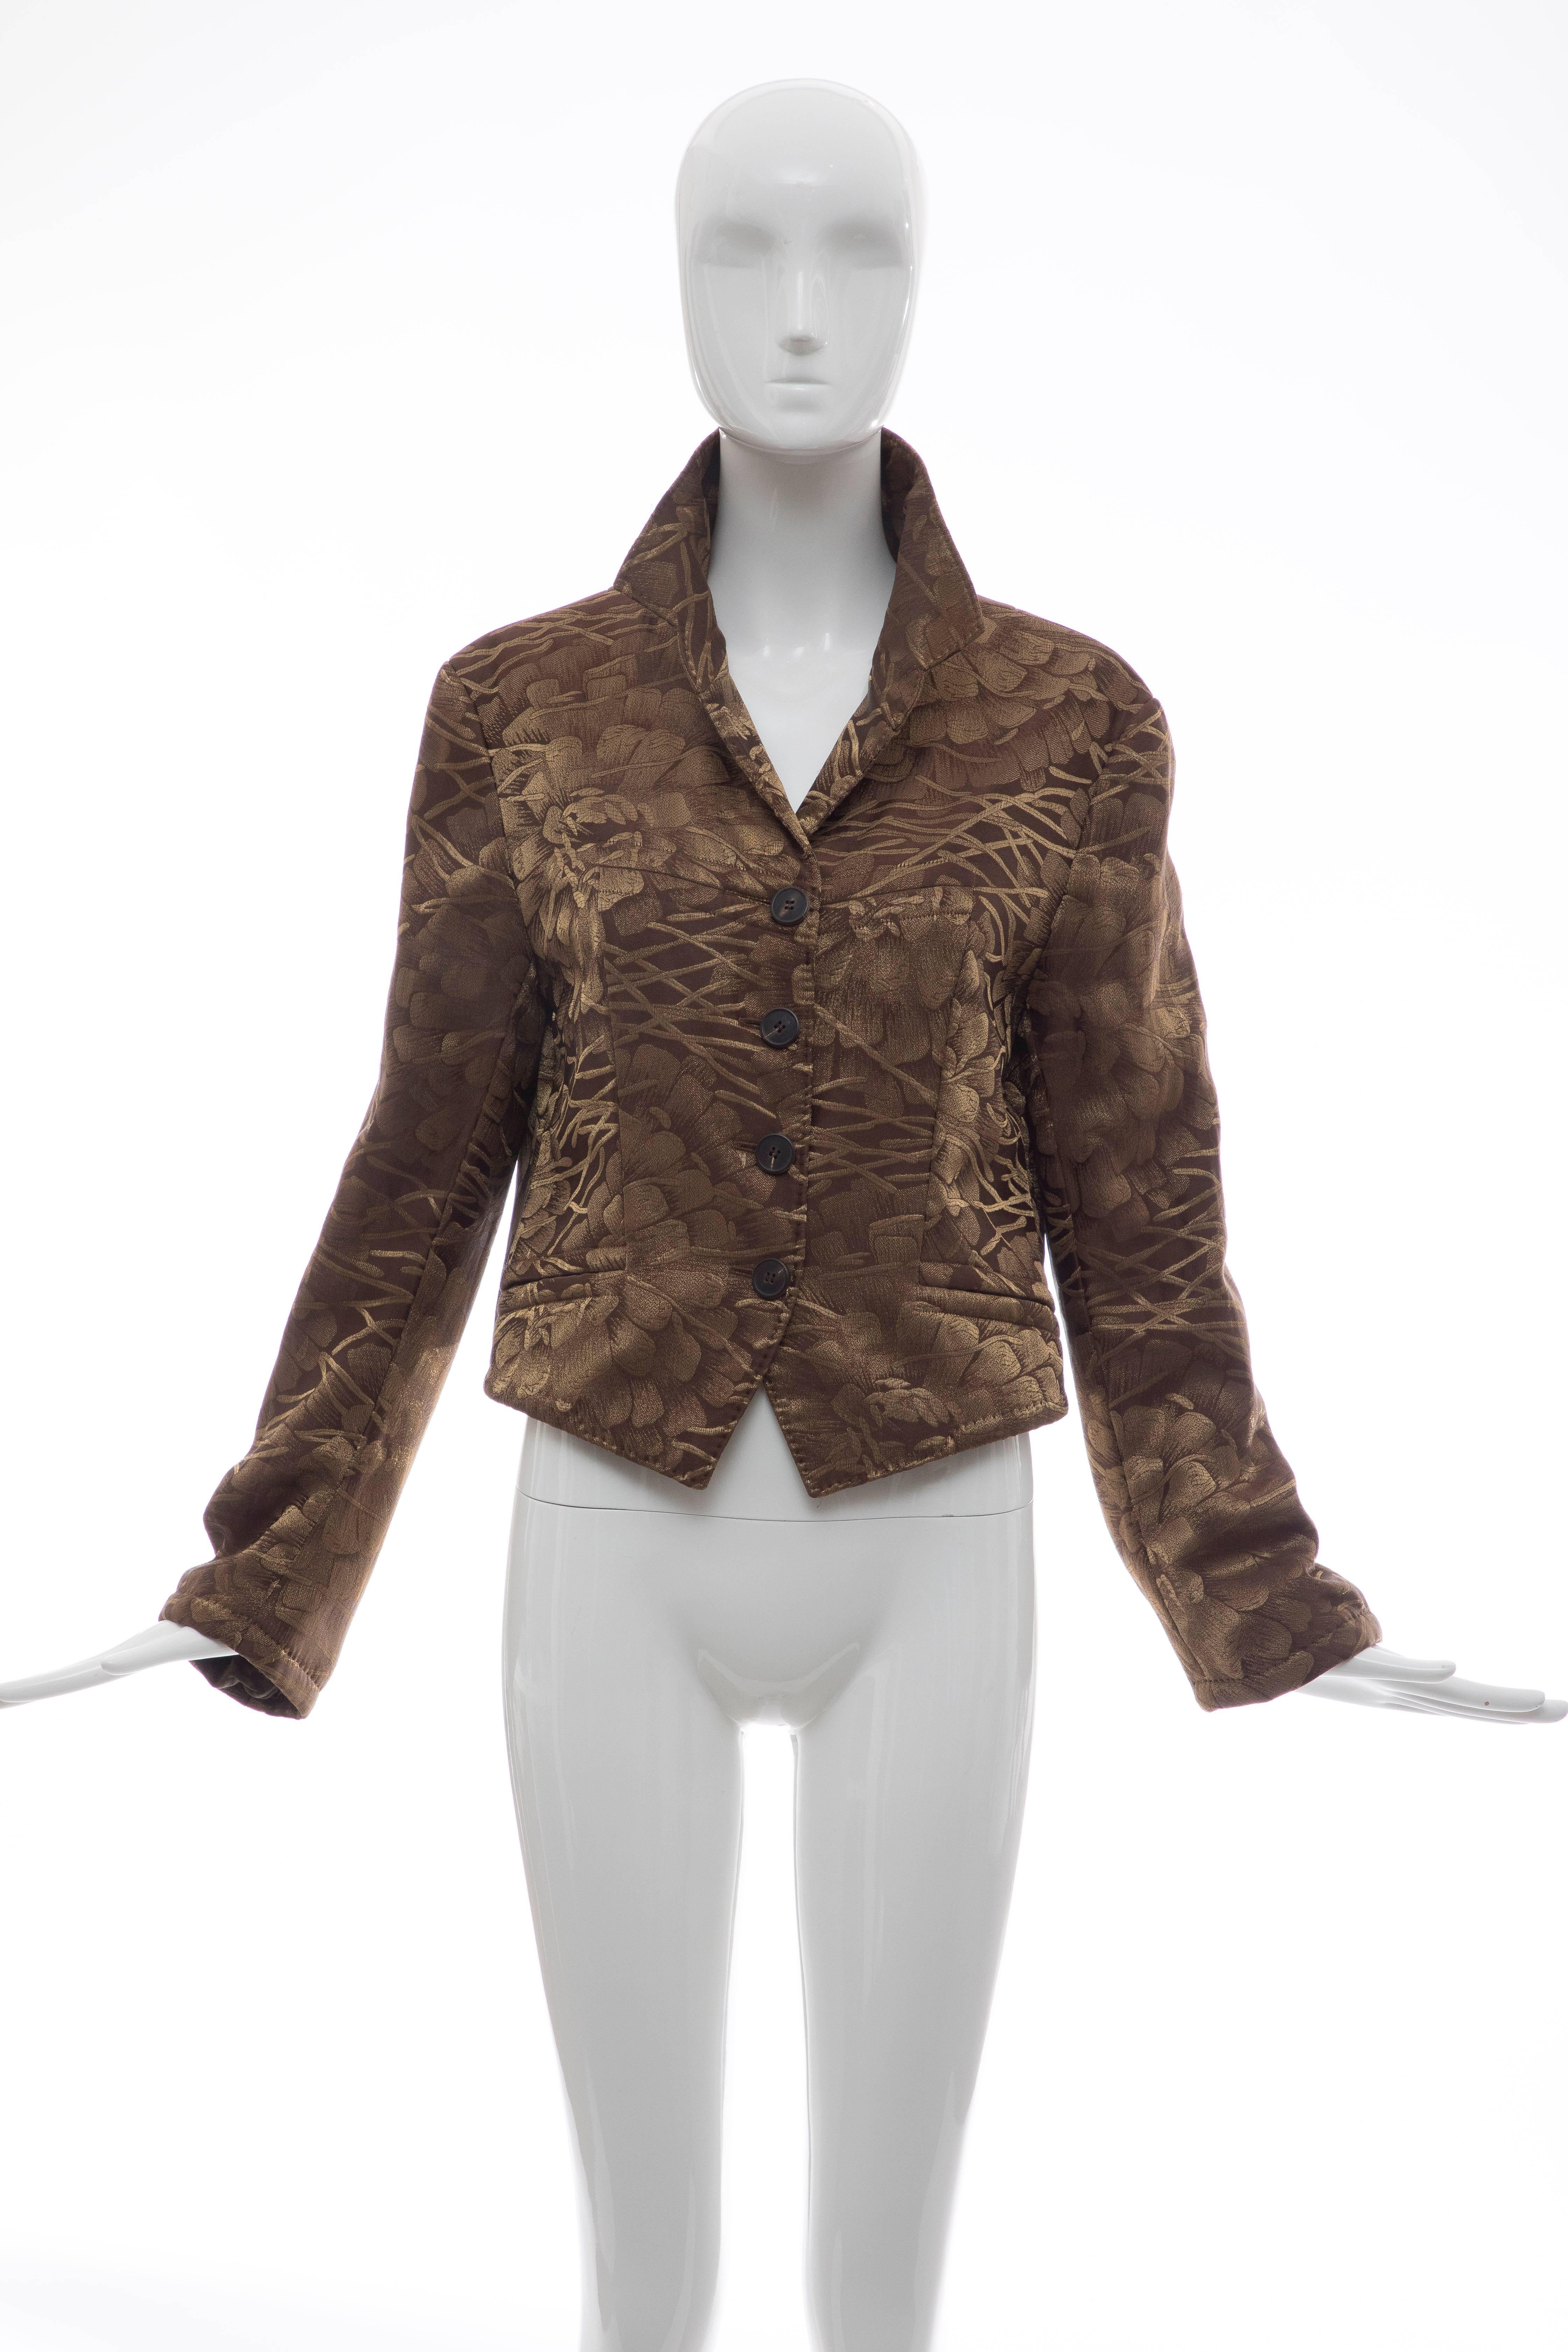  Dries Van Noten, Fall 2003 silk cropped jacket with notched lapels, dual slit pockets at waist, floral pattern throughout, button closures at front and fully lined in silk.

FR. 44, US. 12

Bust: 39, Waist 36, Shoulder 17, Length 22, Sleeve 31
